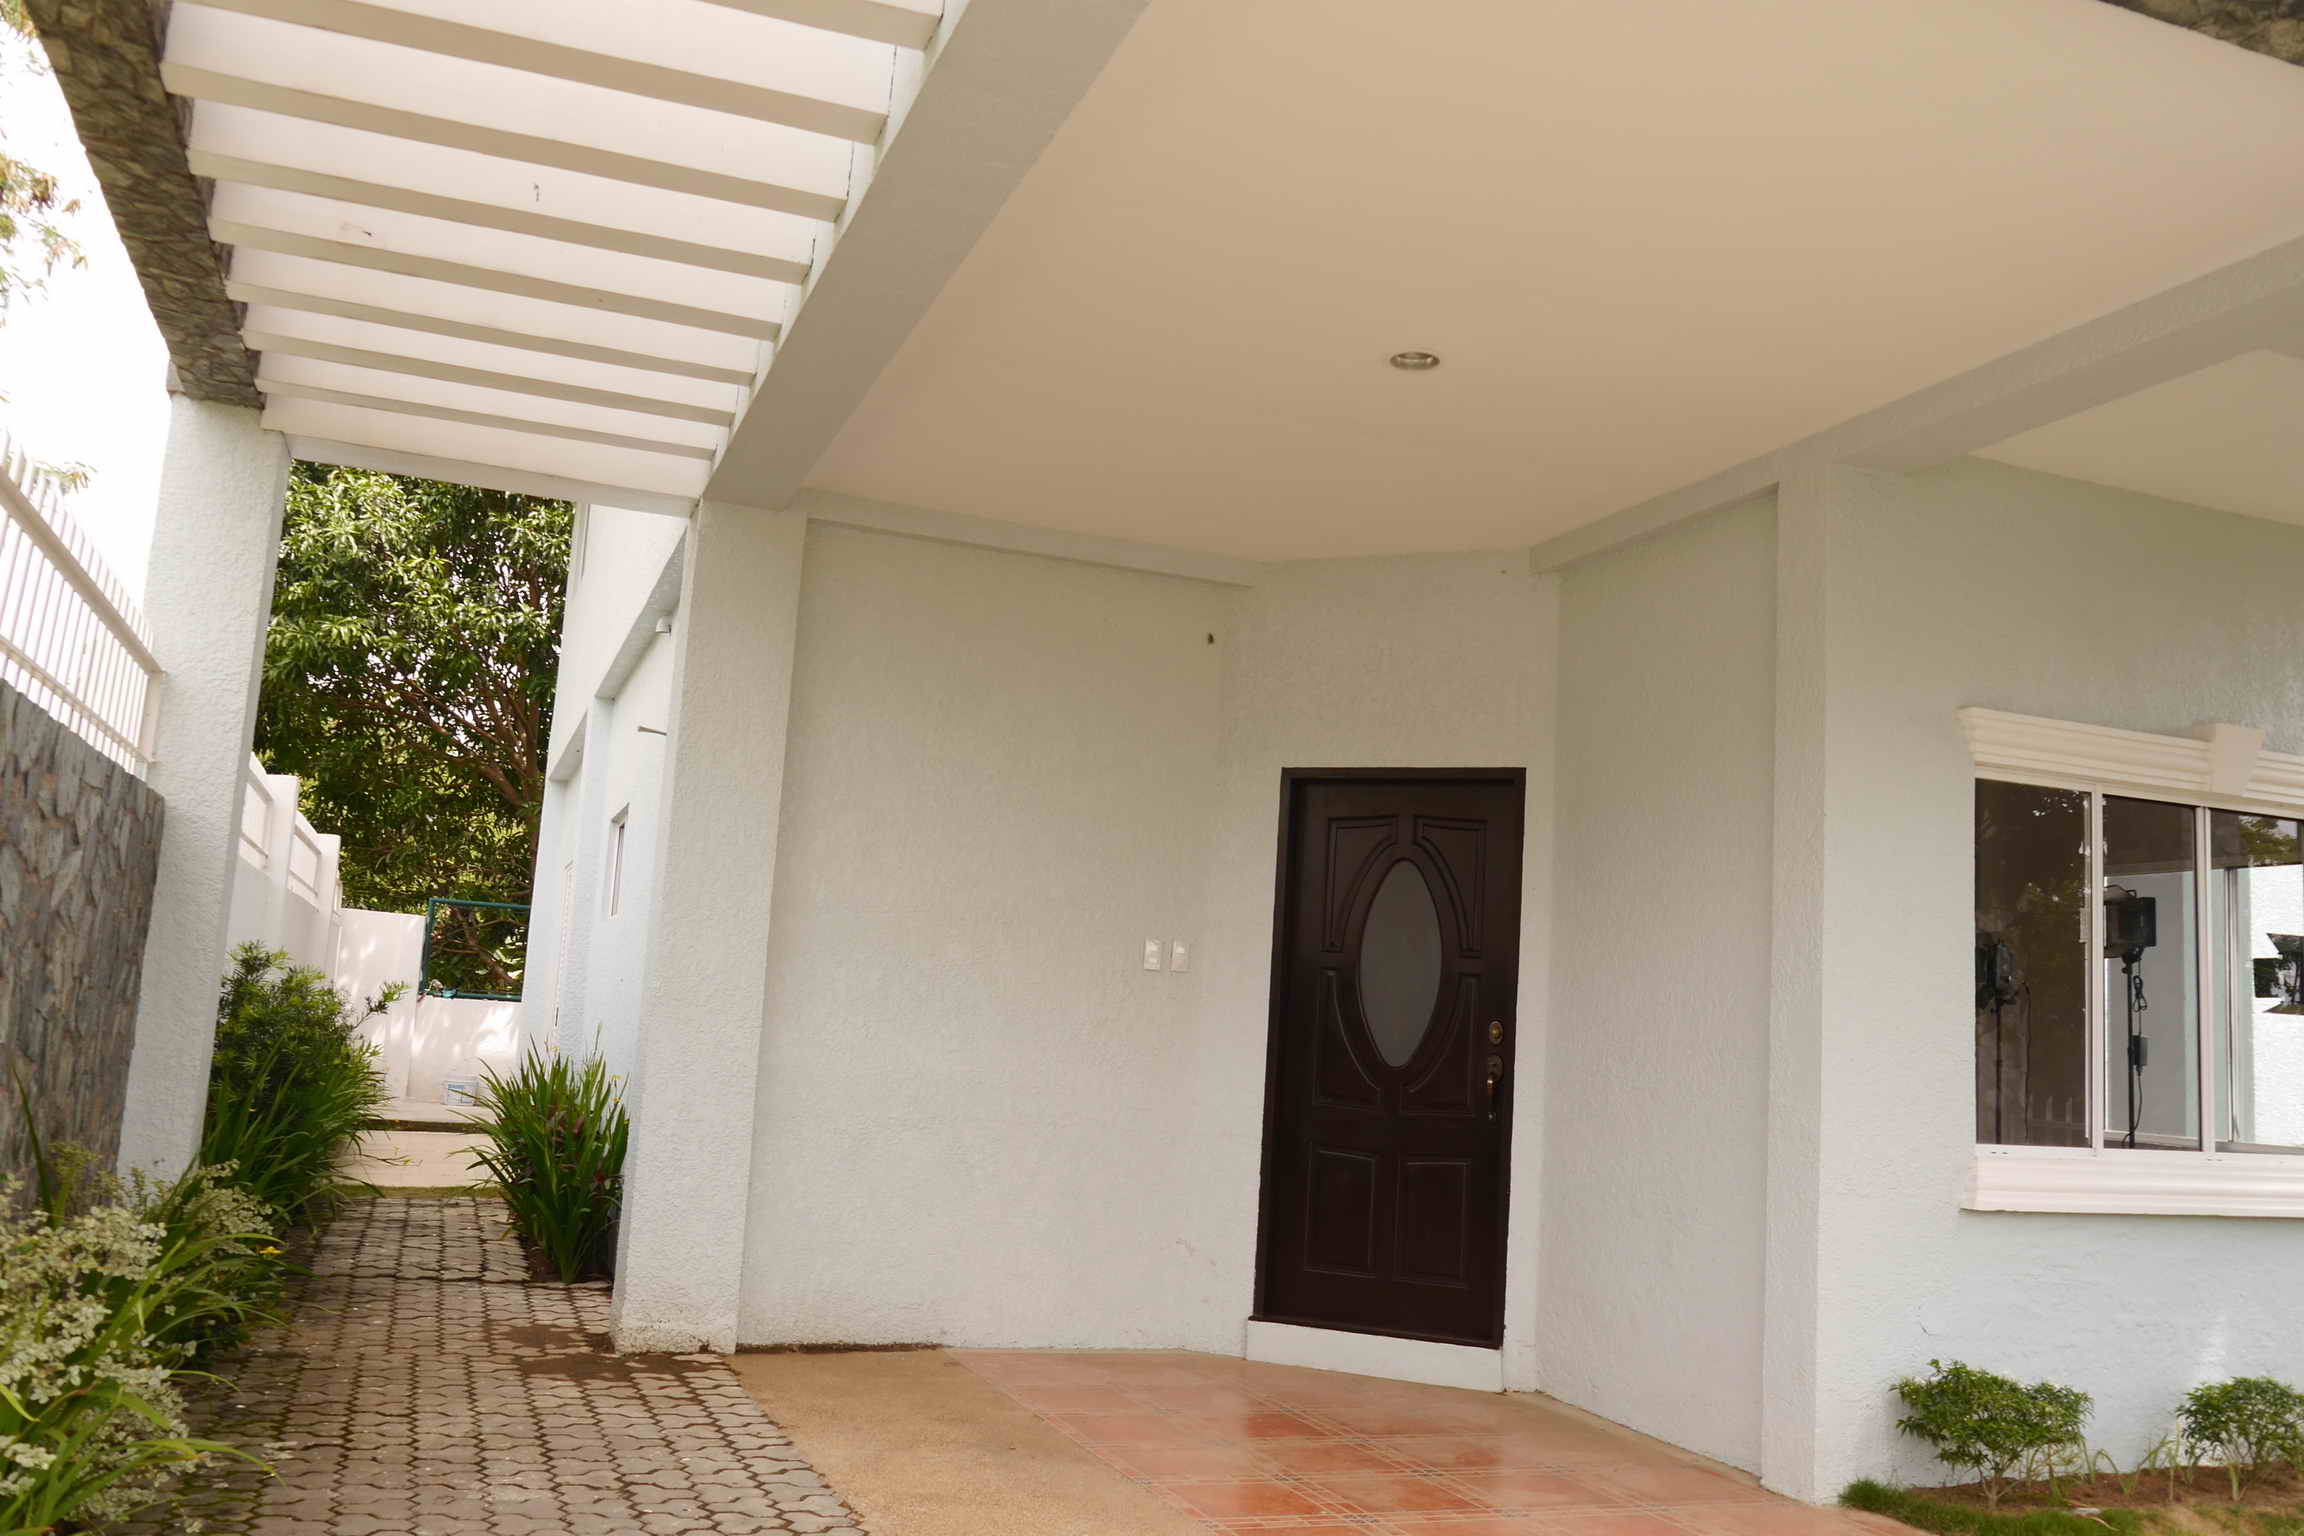 HOUSE FOR SALE IN MOLAVE HIGHLANDS SUBD.